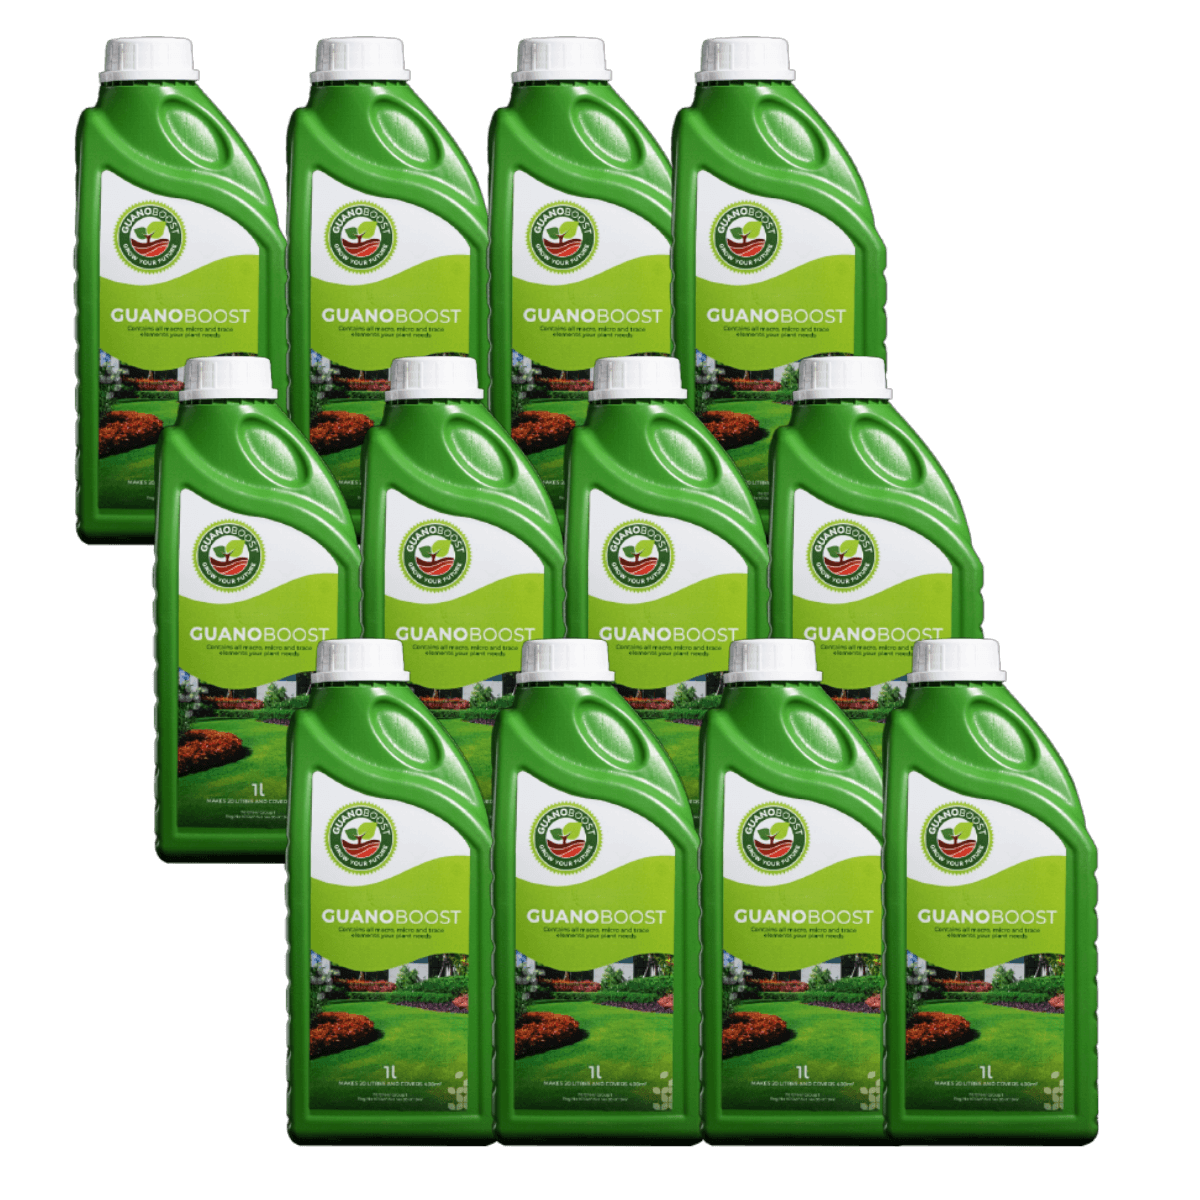 One year Supply for Small Garden 12 x 1l - GuanoBoost